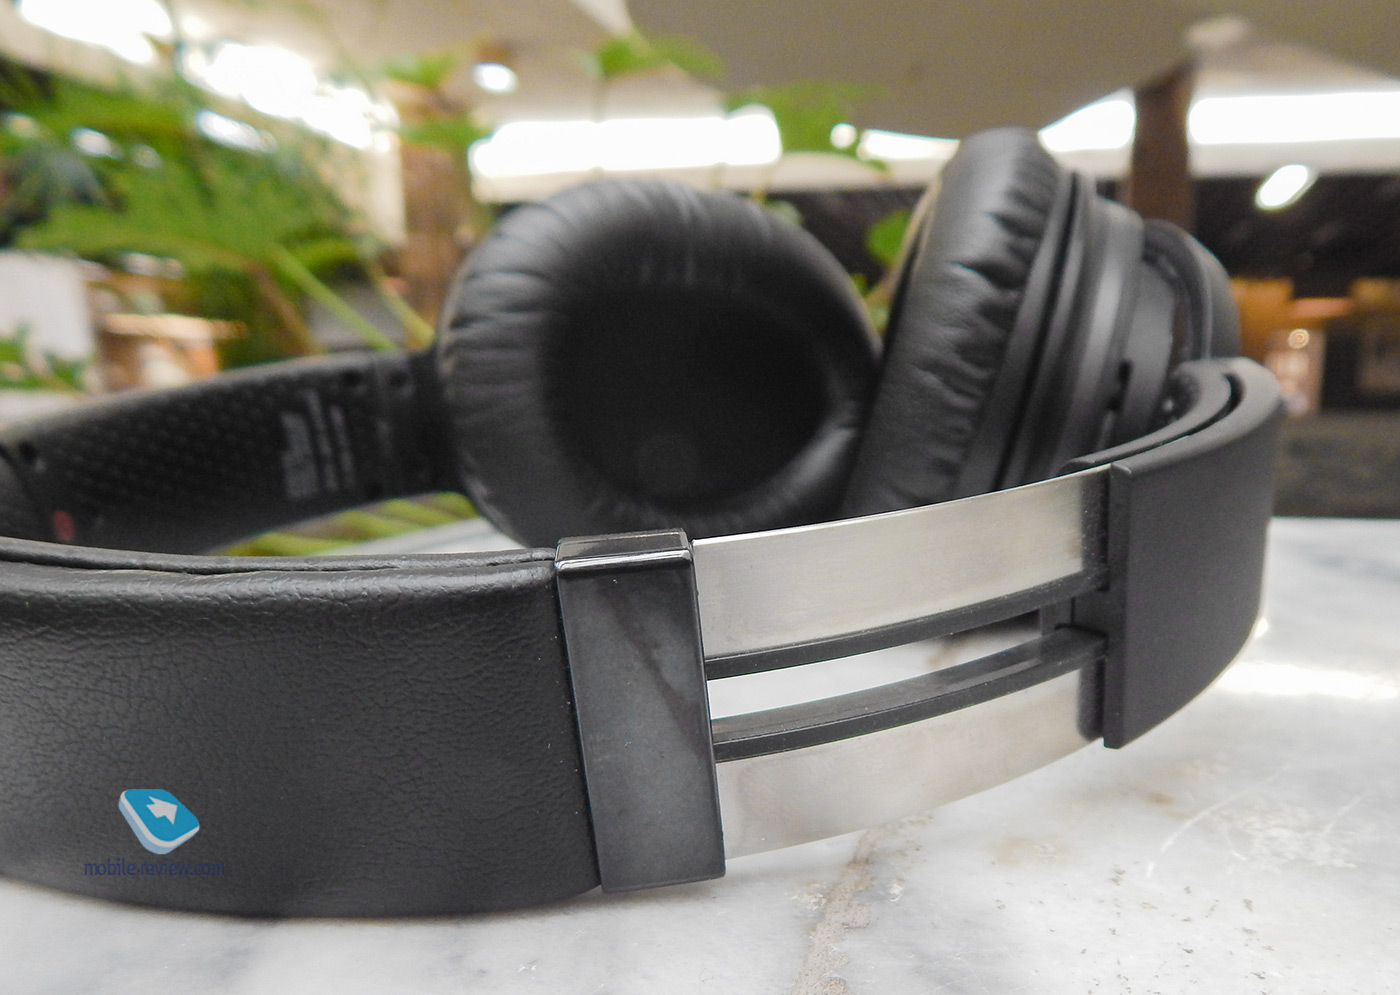         .   Sony MDR-ZX780DC